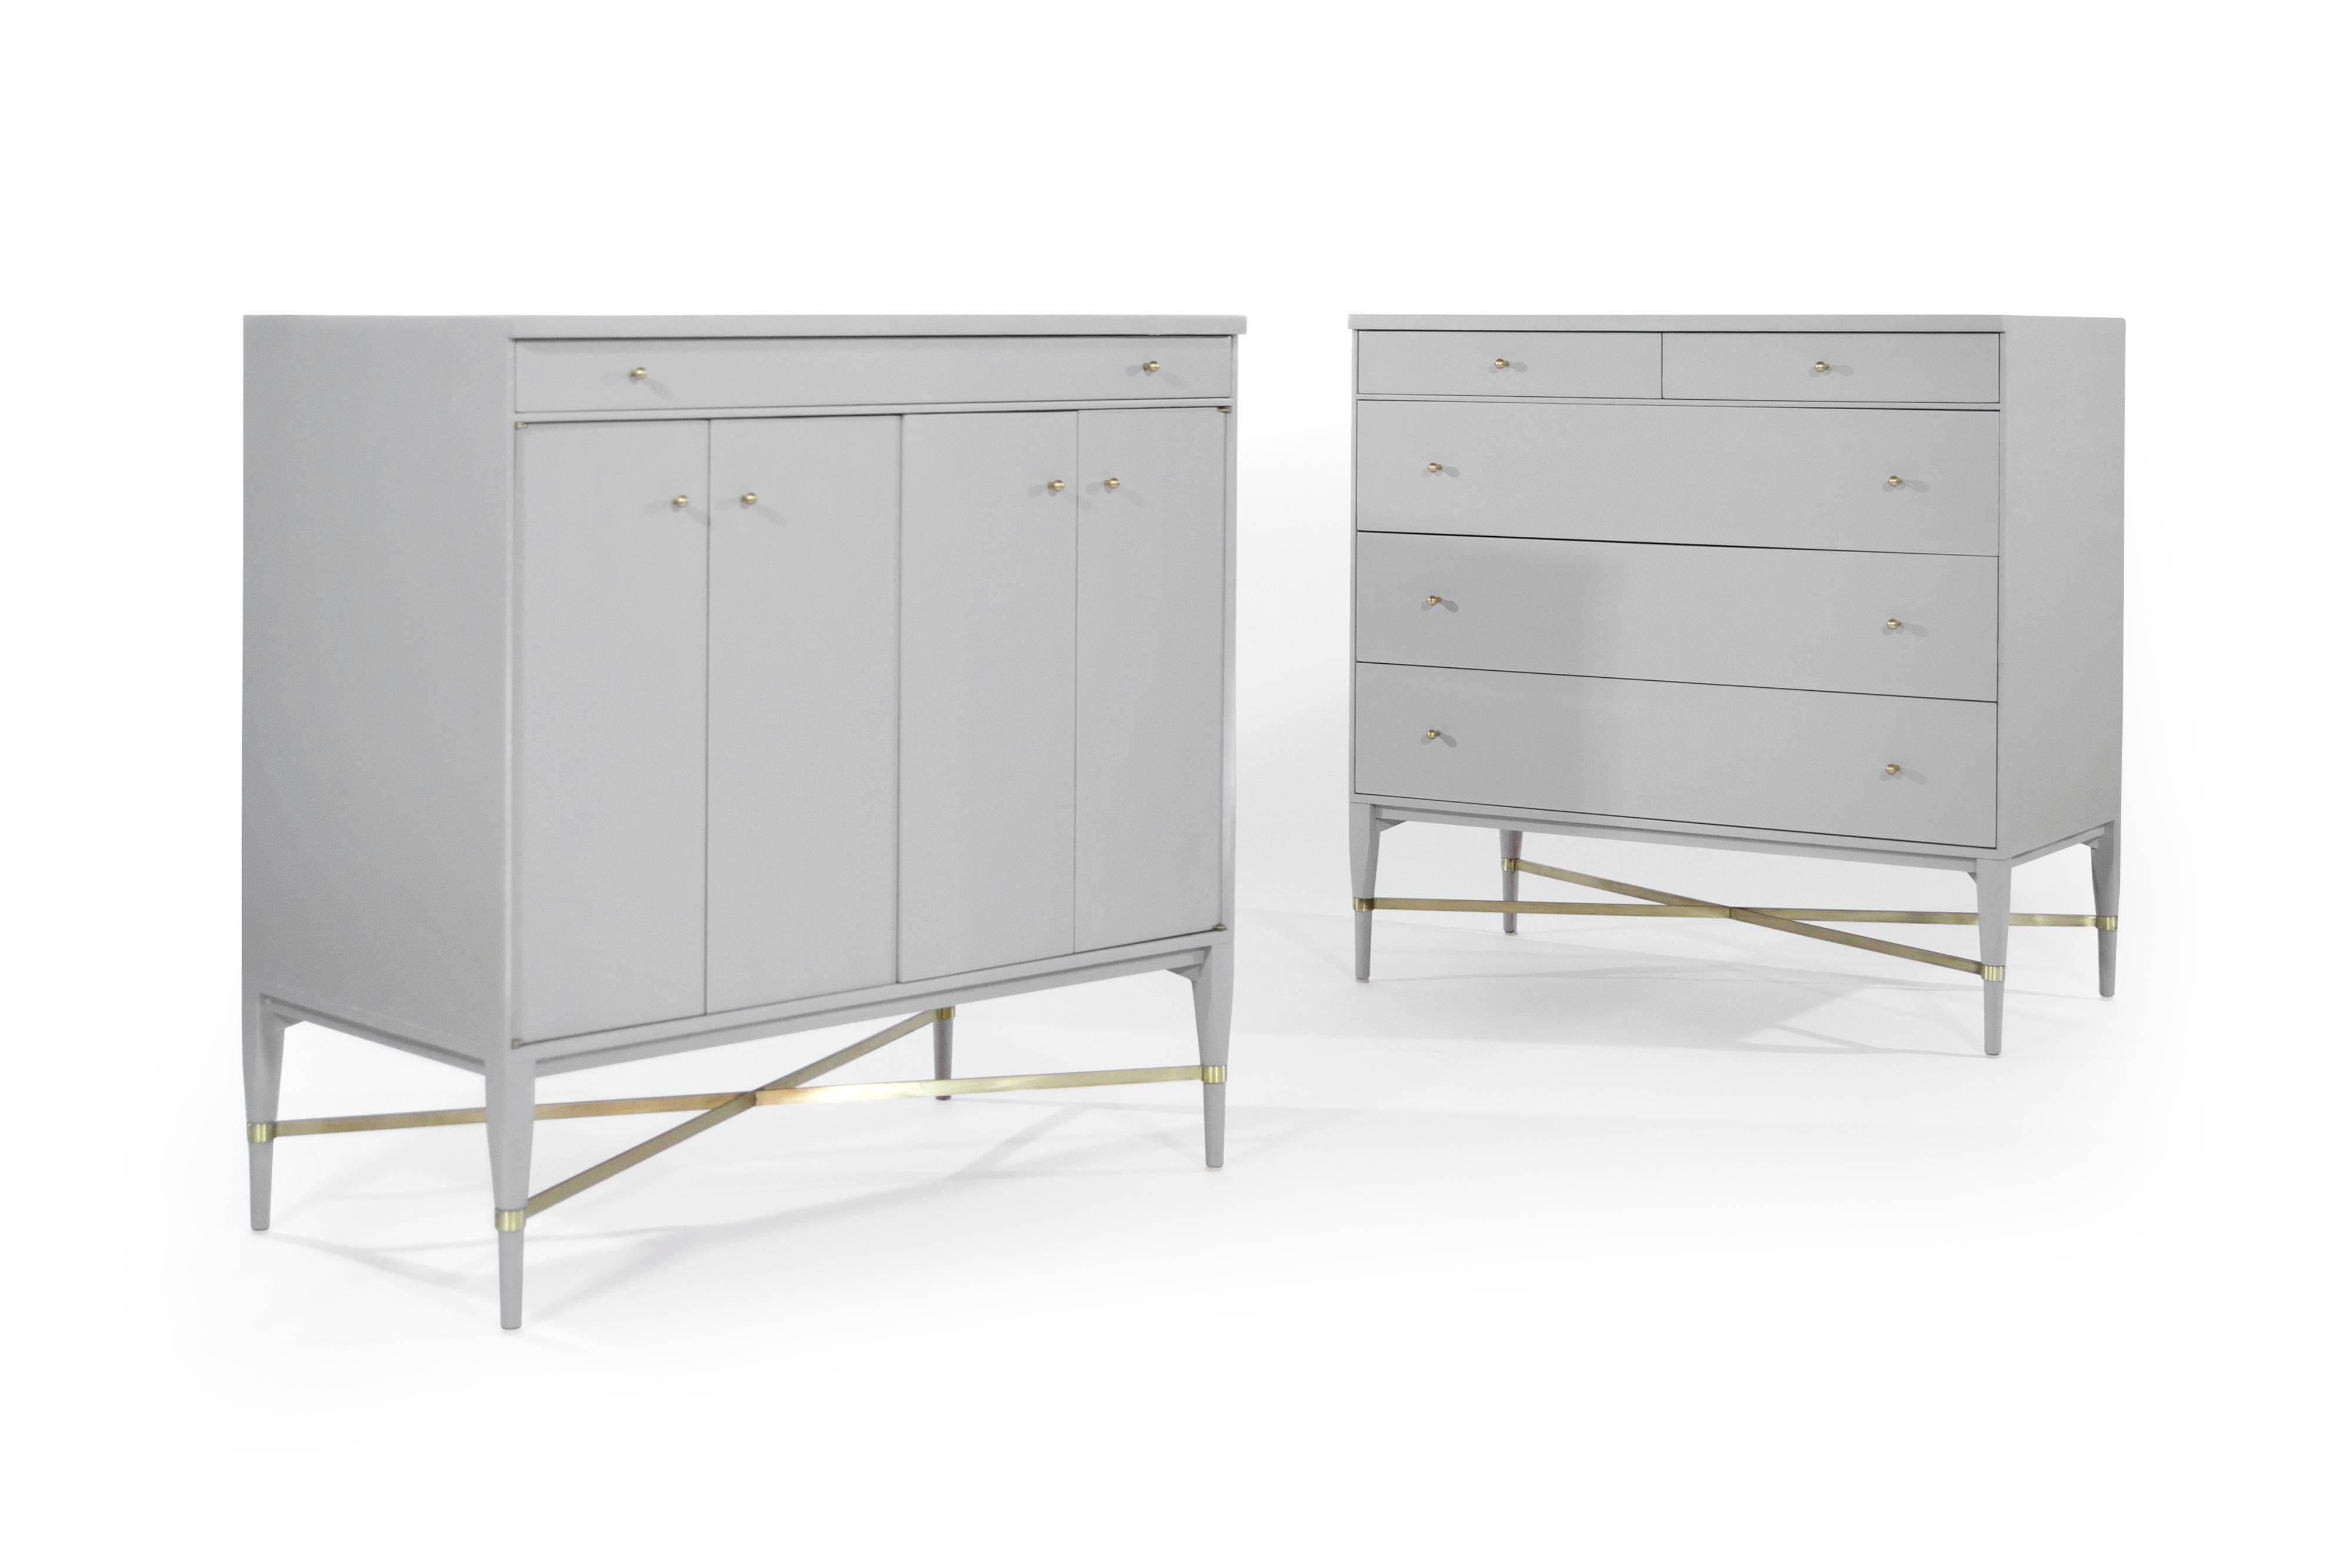 Pair of complimenting bedside tables by iconic furniture designer Paul McCobb. 

Exquisitely redone in light grey, one features a set of 5 drawers, the other bi-fold doors which open to reveal a single shelf.